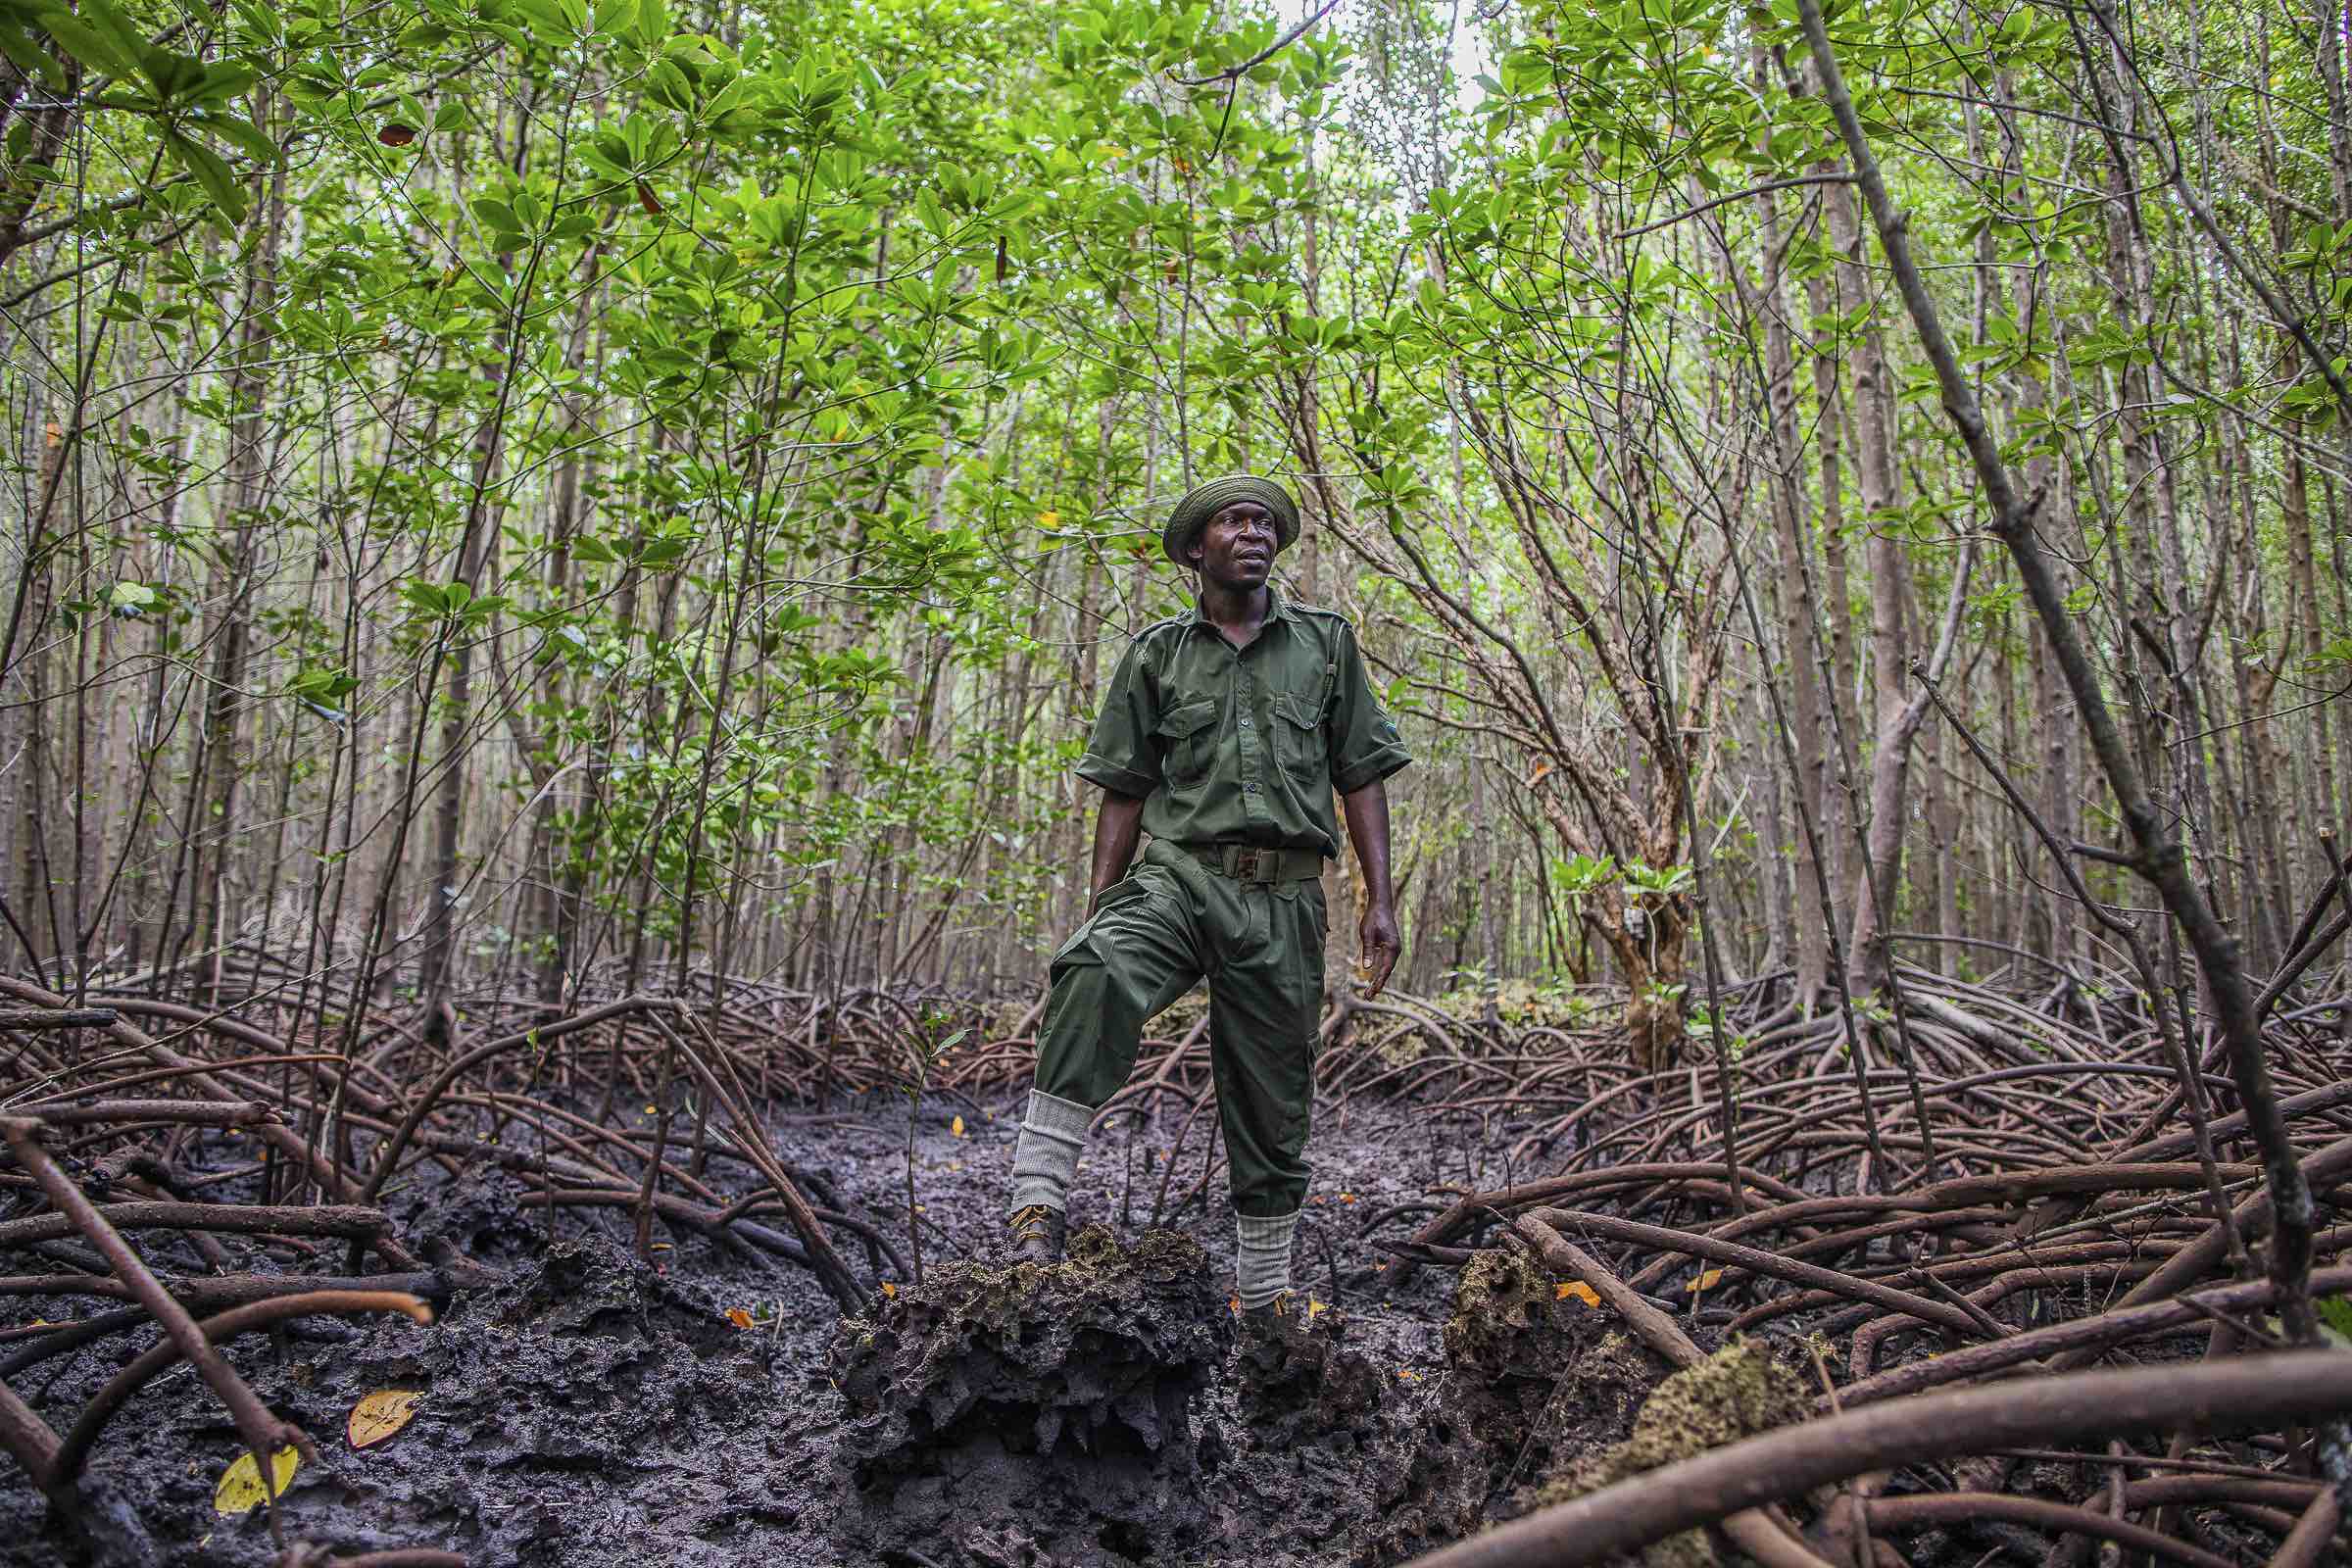 Shaban Mwinji, a community scout ranger, stands in a restored Mangrove Forest by Mikoko Pamoja. Mikoko Pamoja is a community-led mangrove conservation and restoration project based in southern Kenya. Credit: Anthony Ochieng / Climate Visuals Countdown